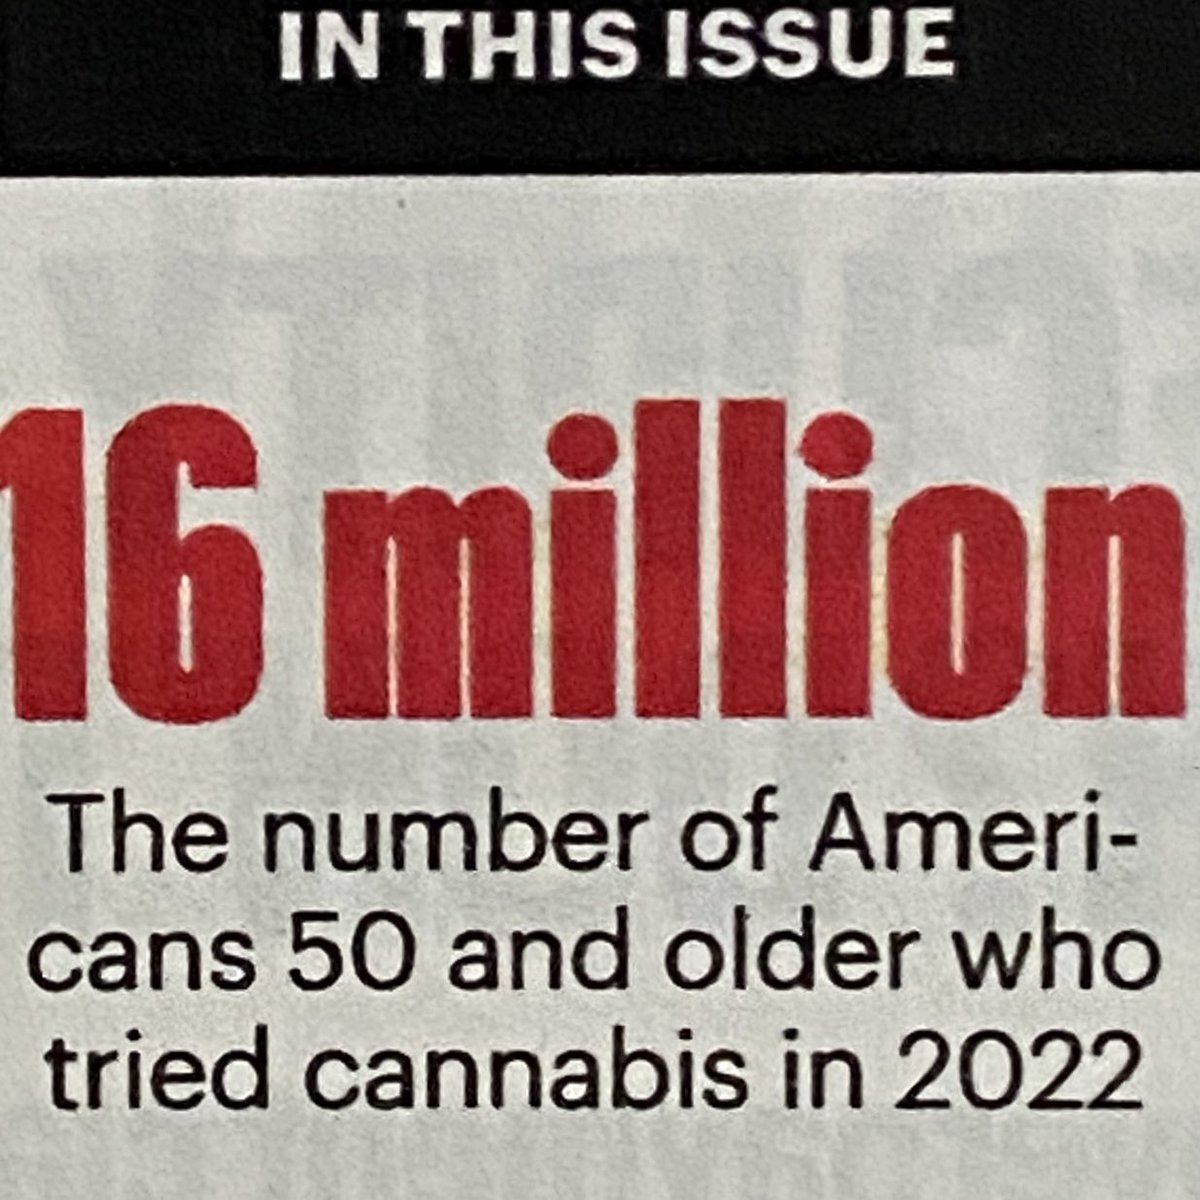 It makes 💯 sense! Those of us over 50 are trying to treat the pain, insomnia, and anxiety without the OTCs that tear the stomach up. Federally legalizing it is way overdue. In the #aarp bulletin this month 👇🏼👇🏼👇🏼

#over50 #legalize #marijuana #painrelief #HolisticHealth